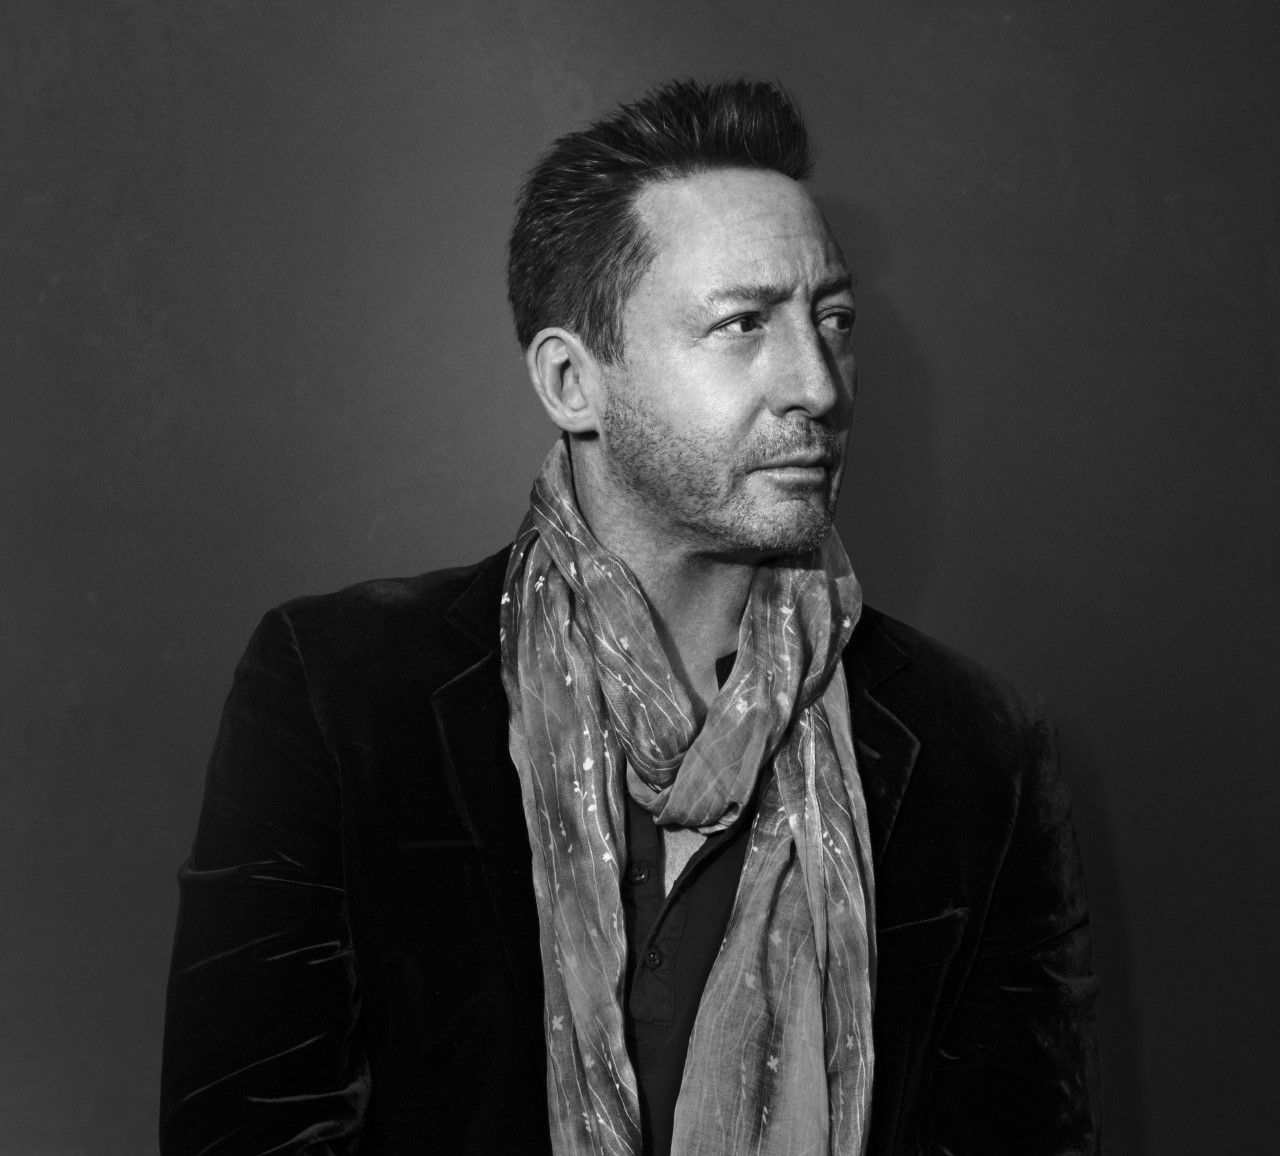 Julian Lennon teams up with US furnishings store RH for